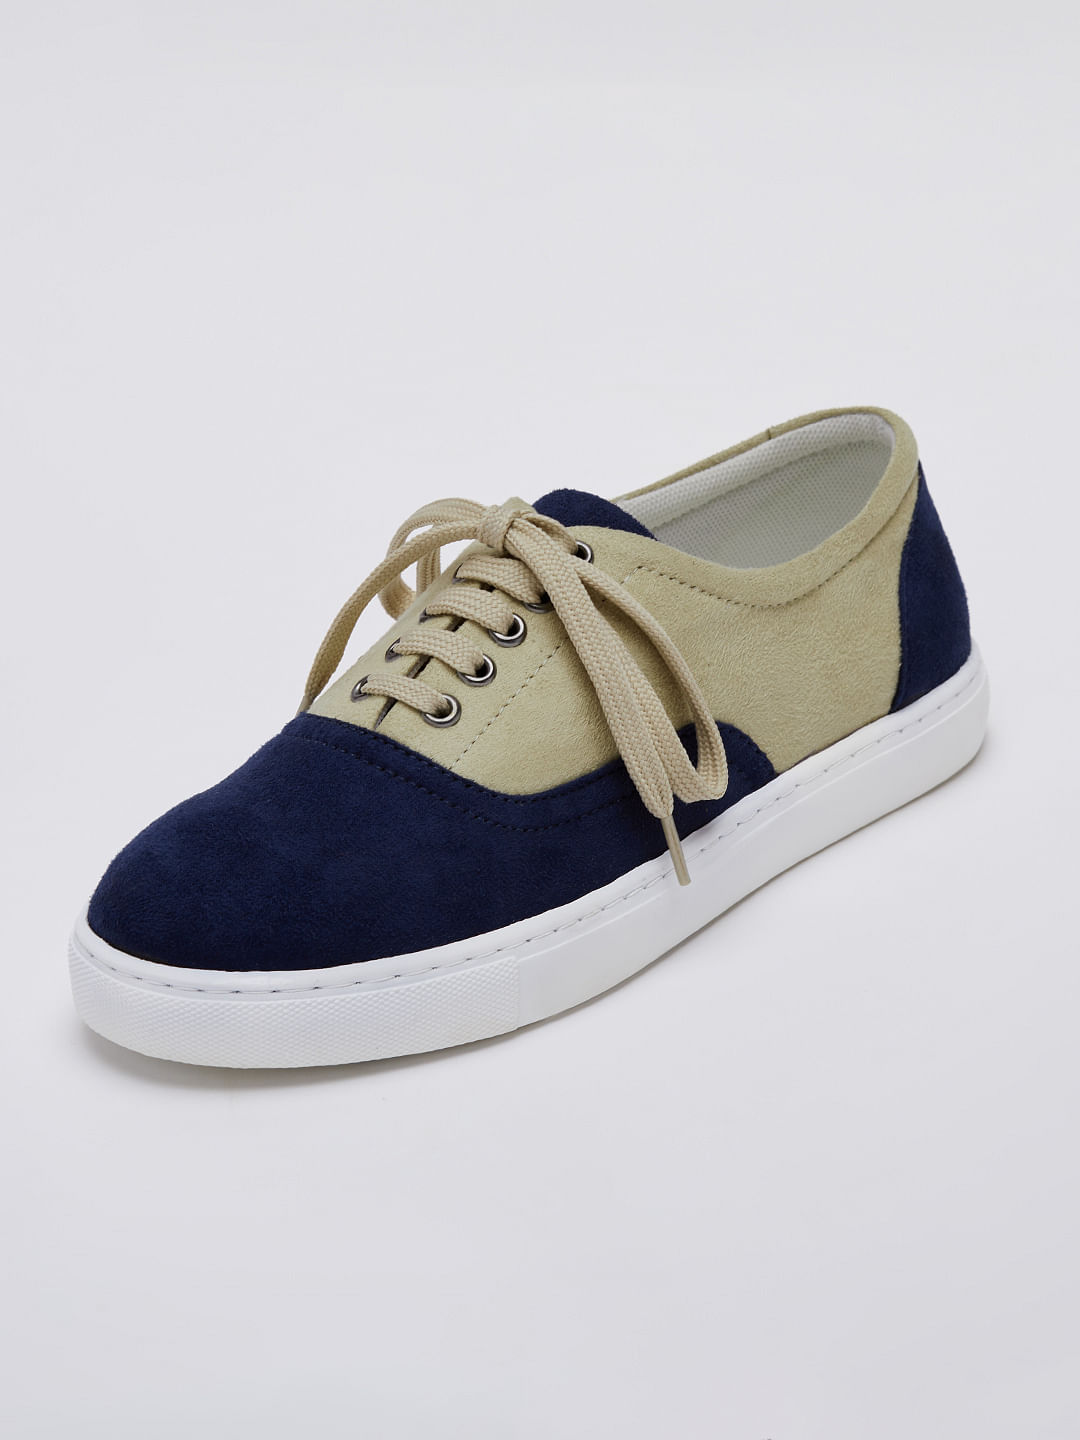 Buy Colour Block Basics Blue And White For Women Lace Up Shoes Online